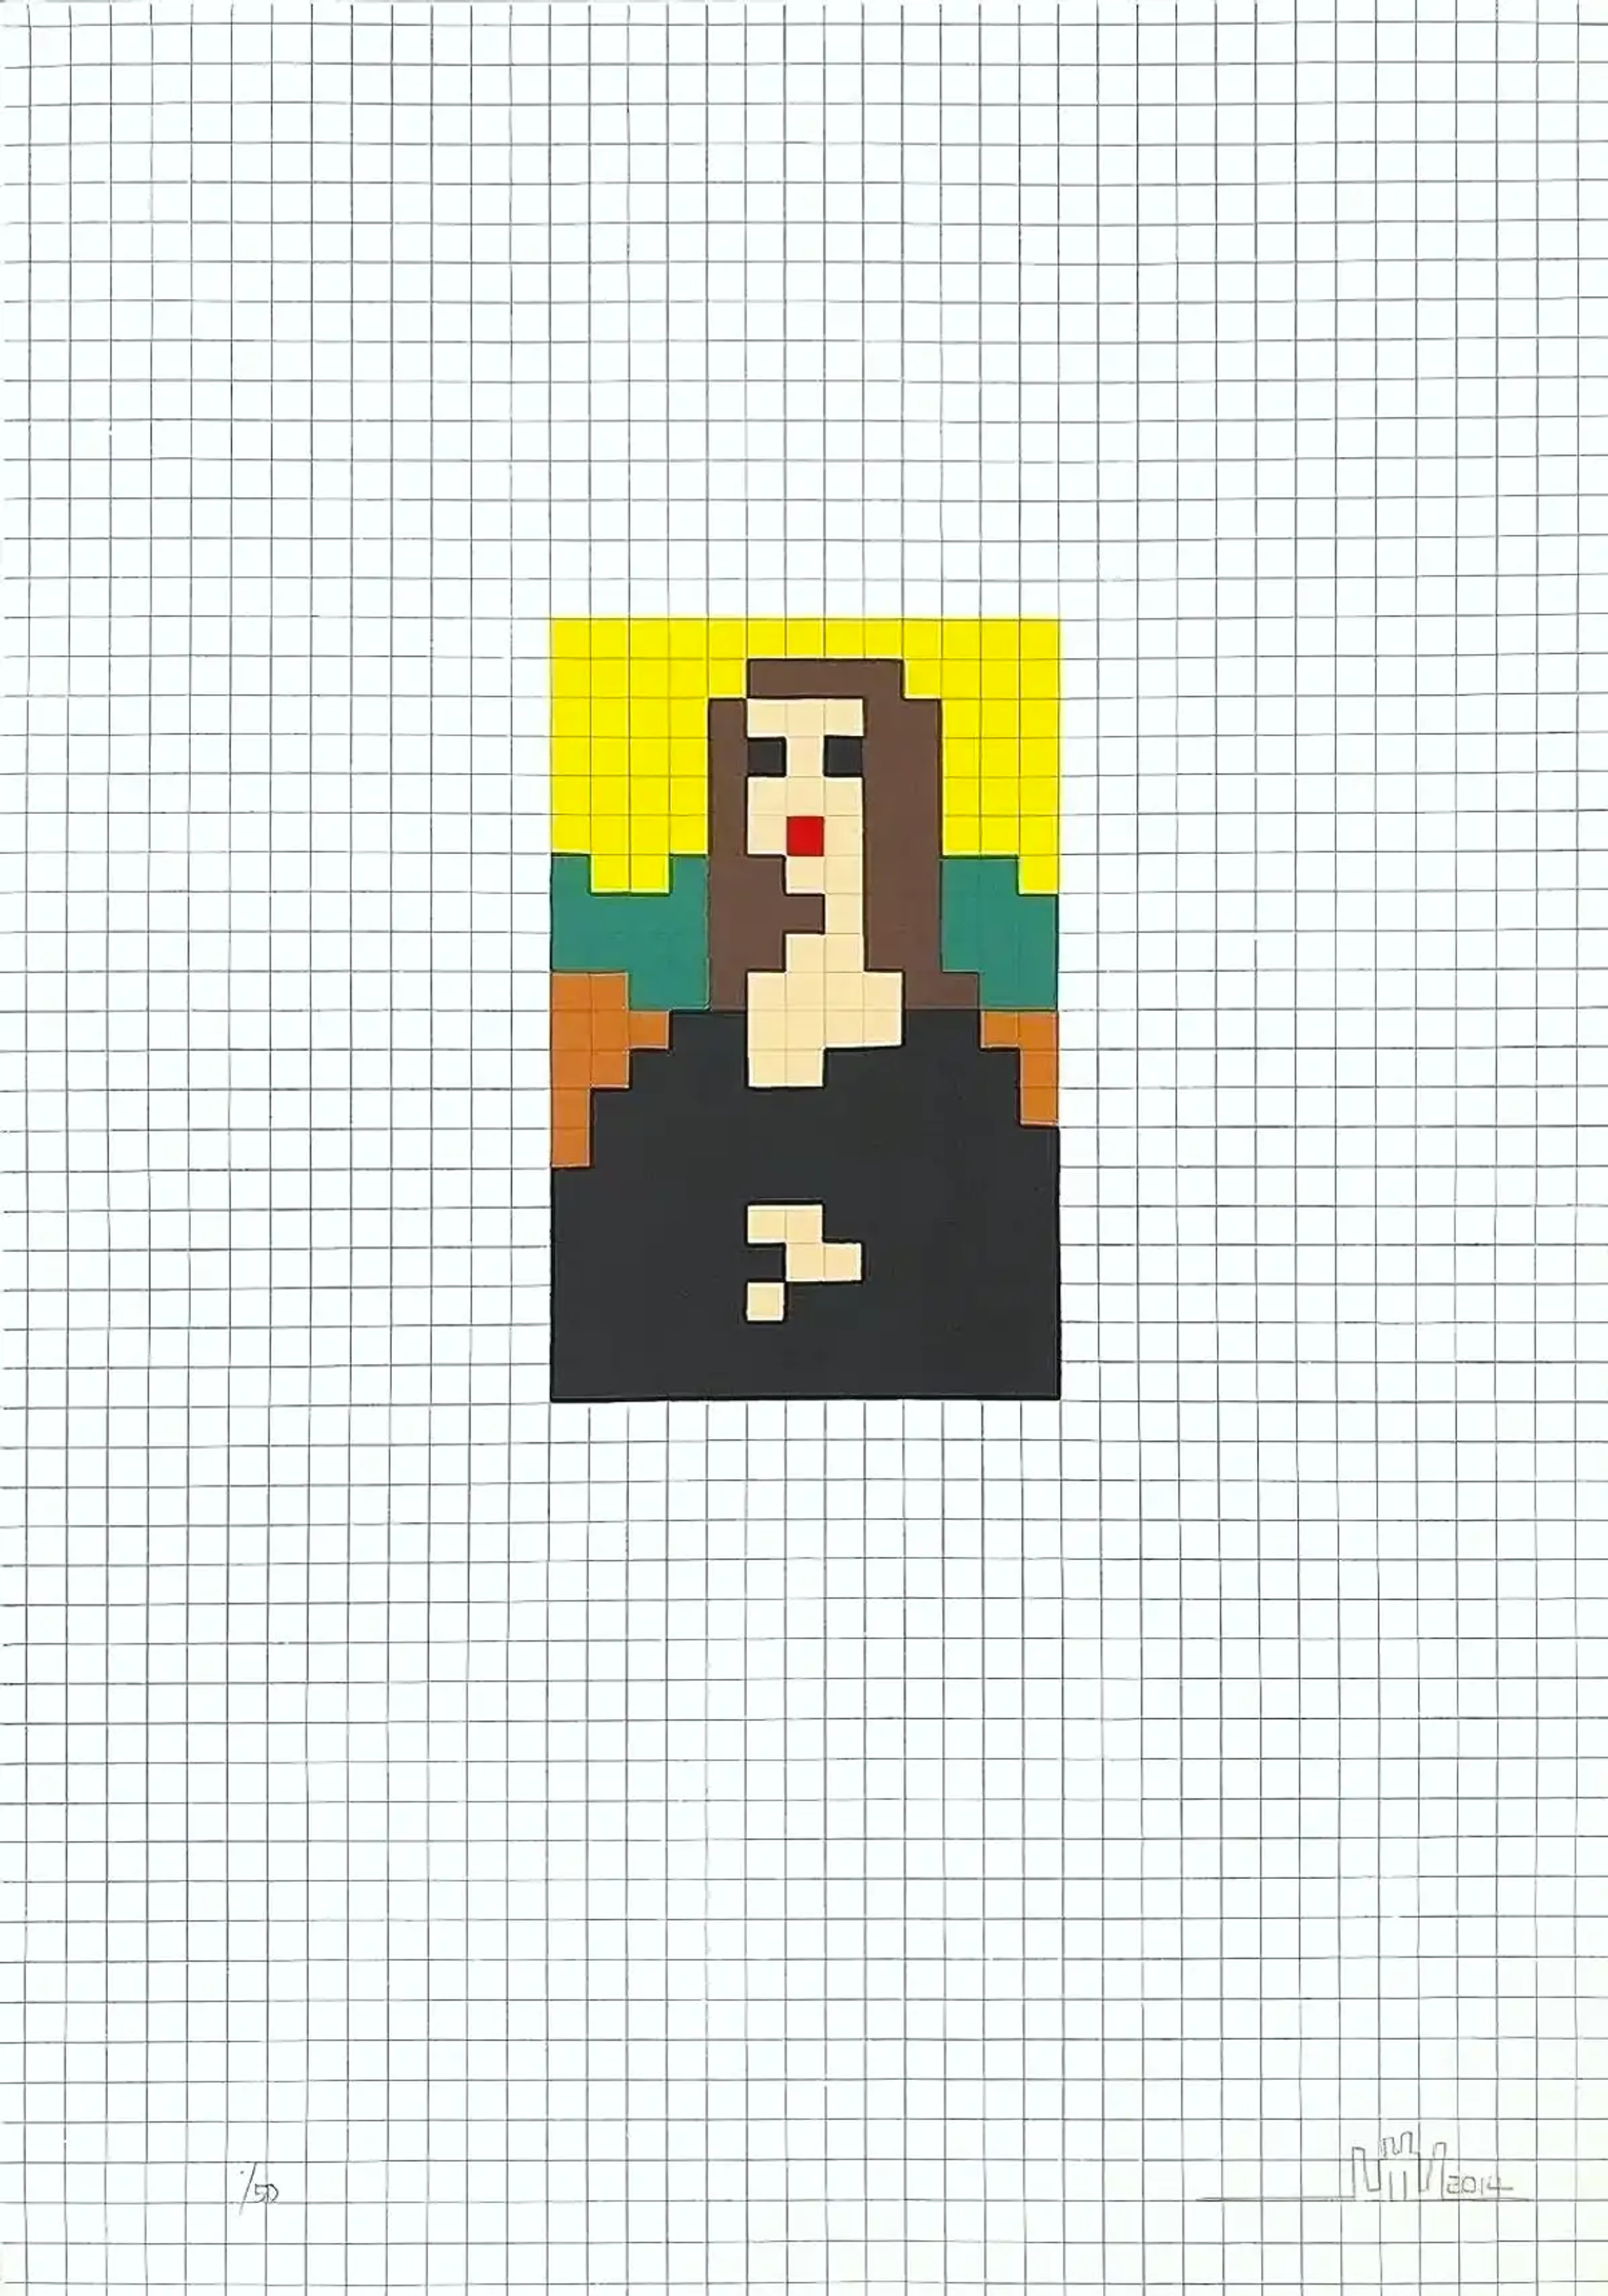 This print depicts a low-res, highly pixelated image of Leonardo’s Da Vinci’s ubiquitous Mona Lisa. In his signature, chunky, retro and pixelated style, Invader has re-made the image of Da Vinci’s Mona Lisa; her posture still discernible. The background of mysterious, atmospheric mountains has been distilled into crude, chunky pixels of bright yellow, green and orange. 